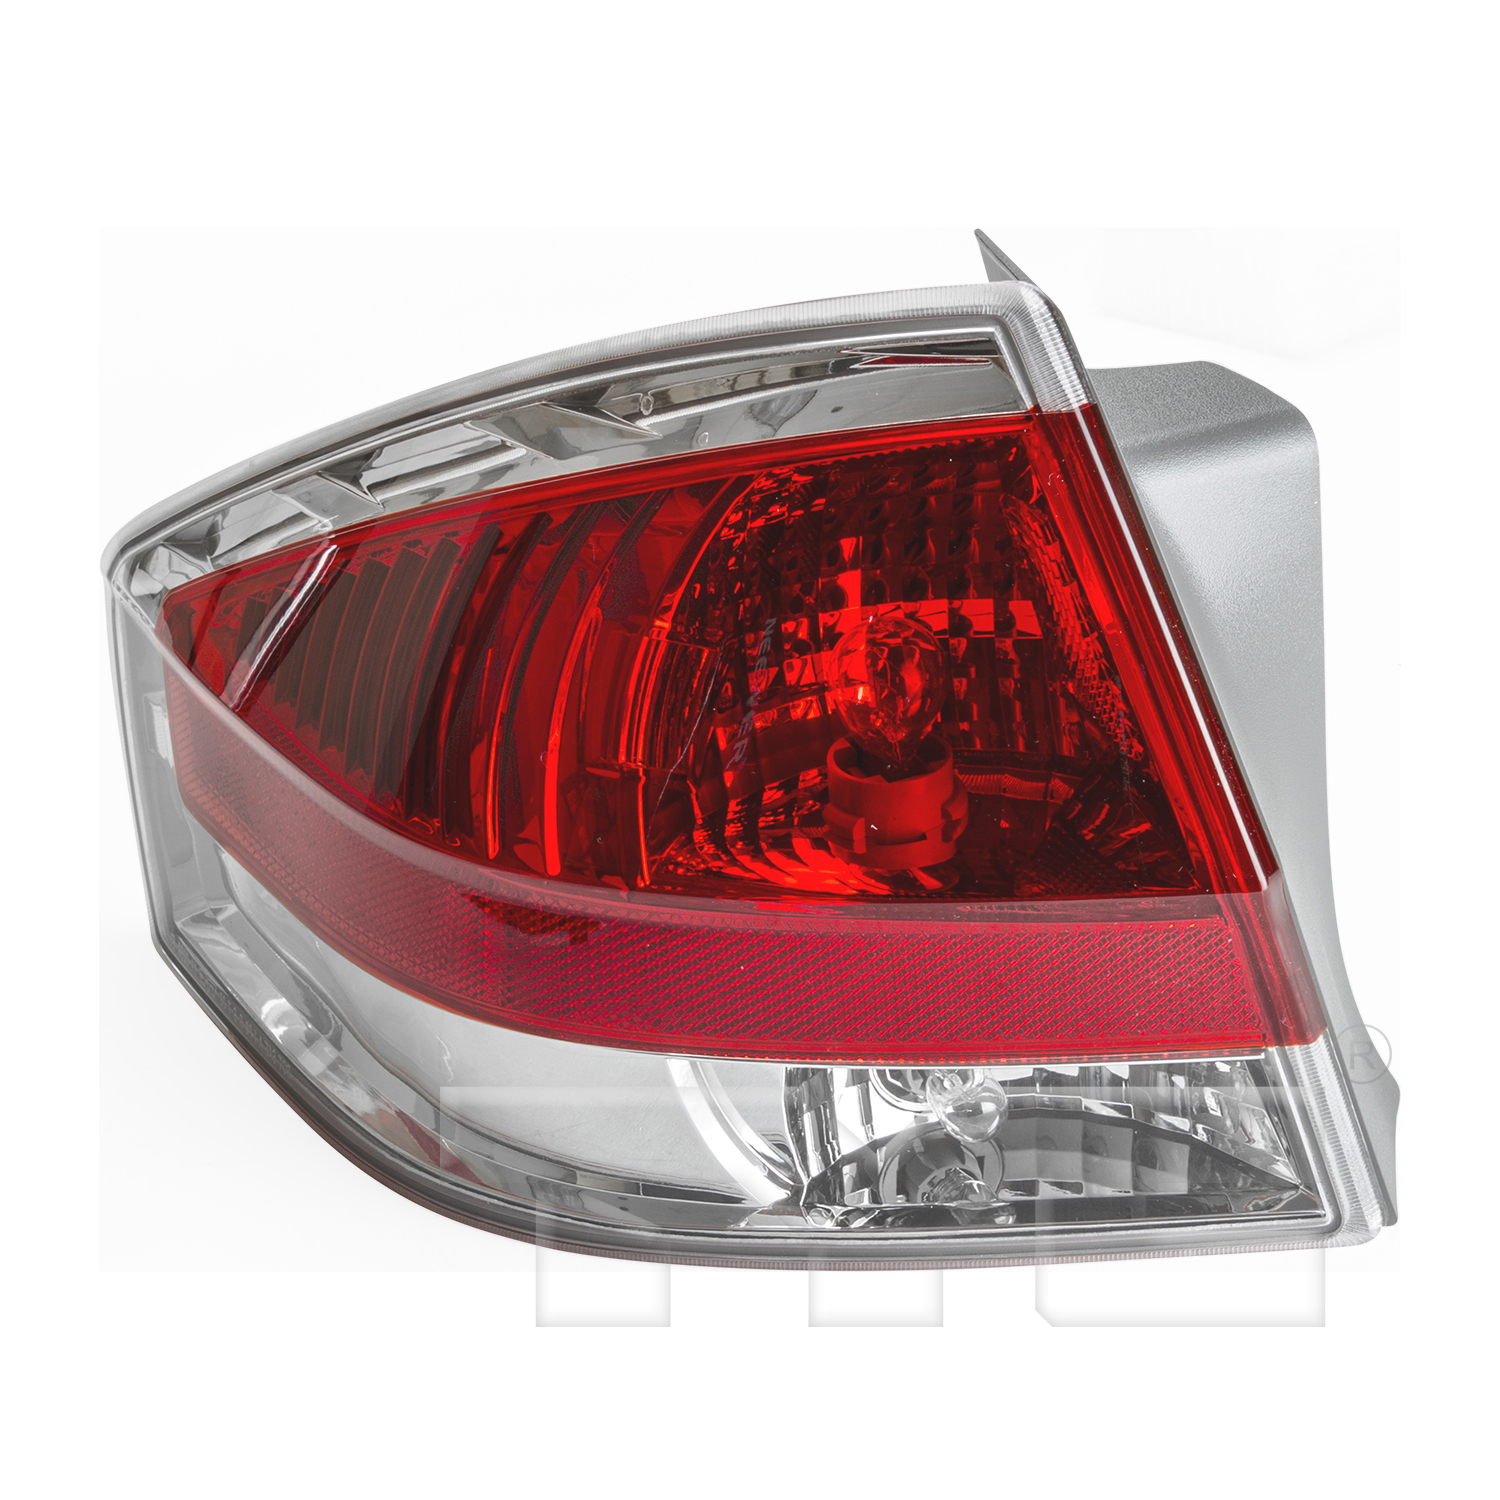 Aftermarket TAILLIGHTS for FORD - FOCUS, FOCUS,07-08,LT Taillamp assy